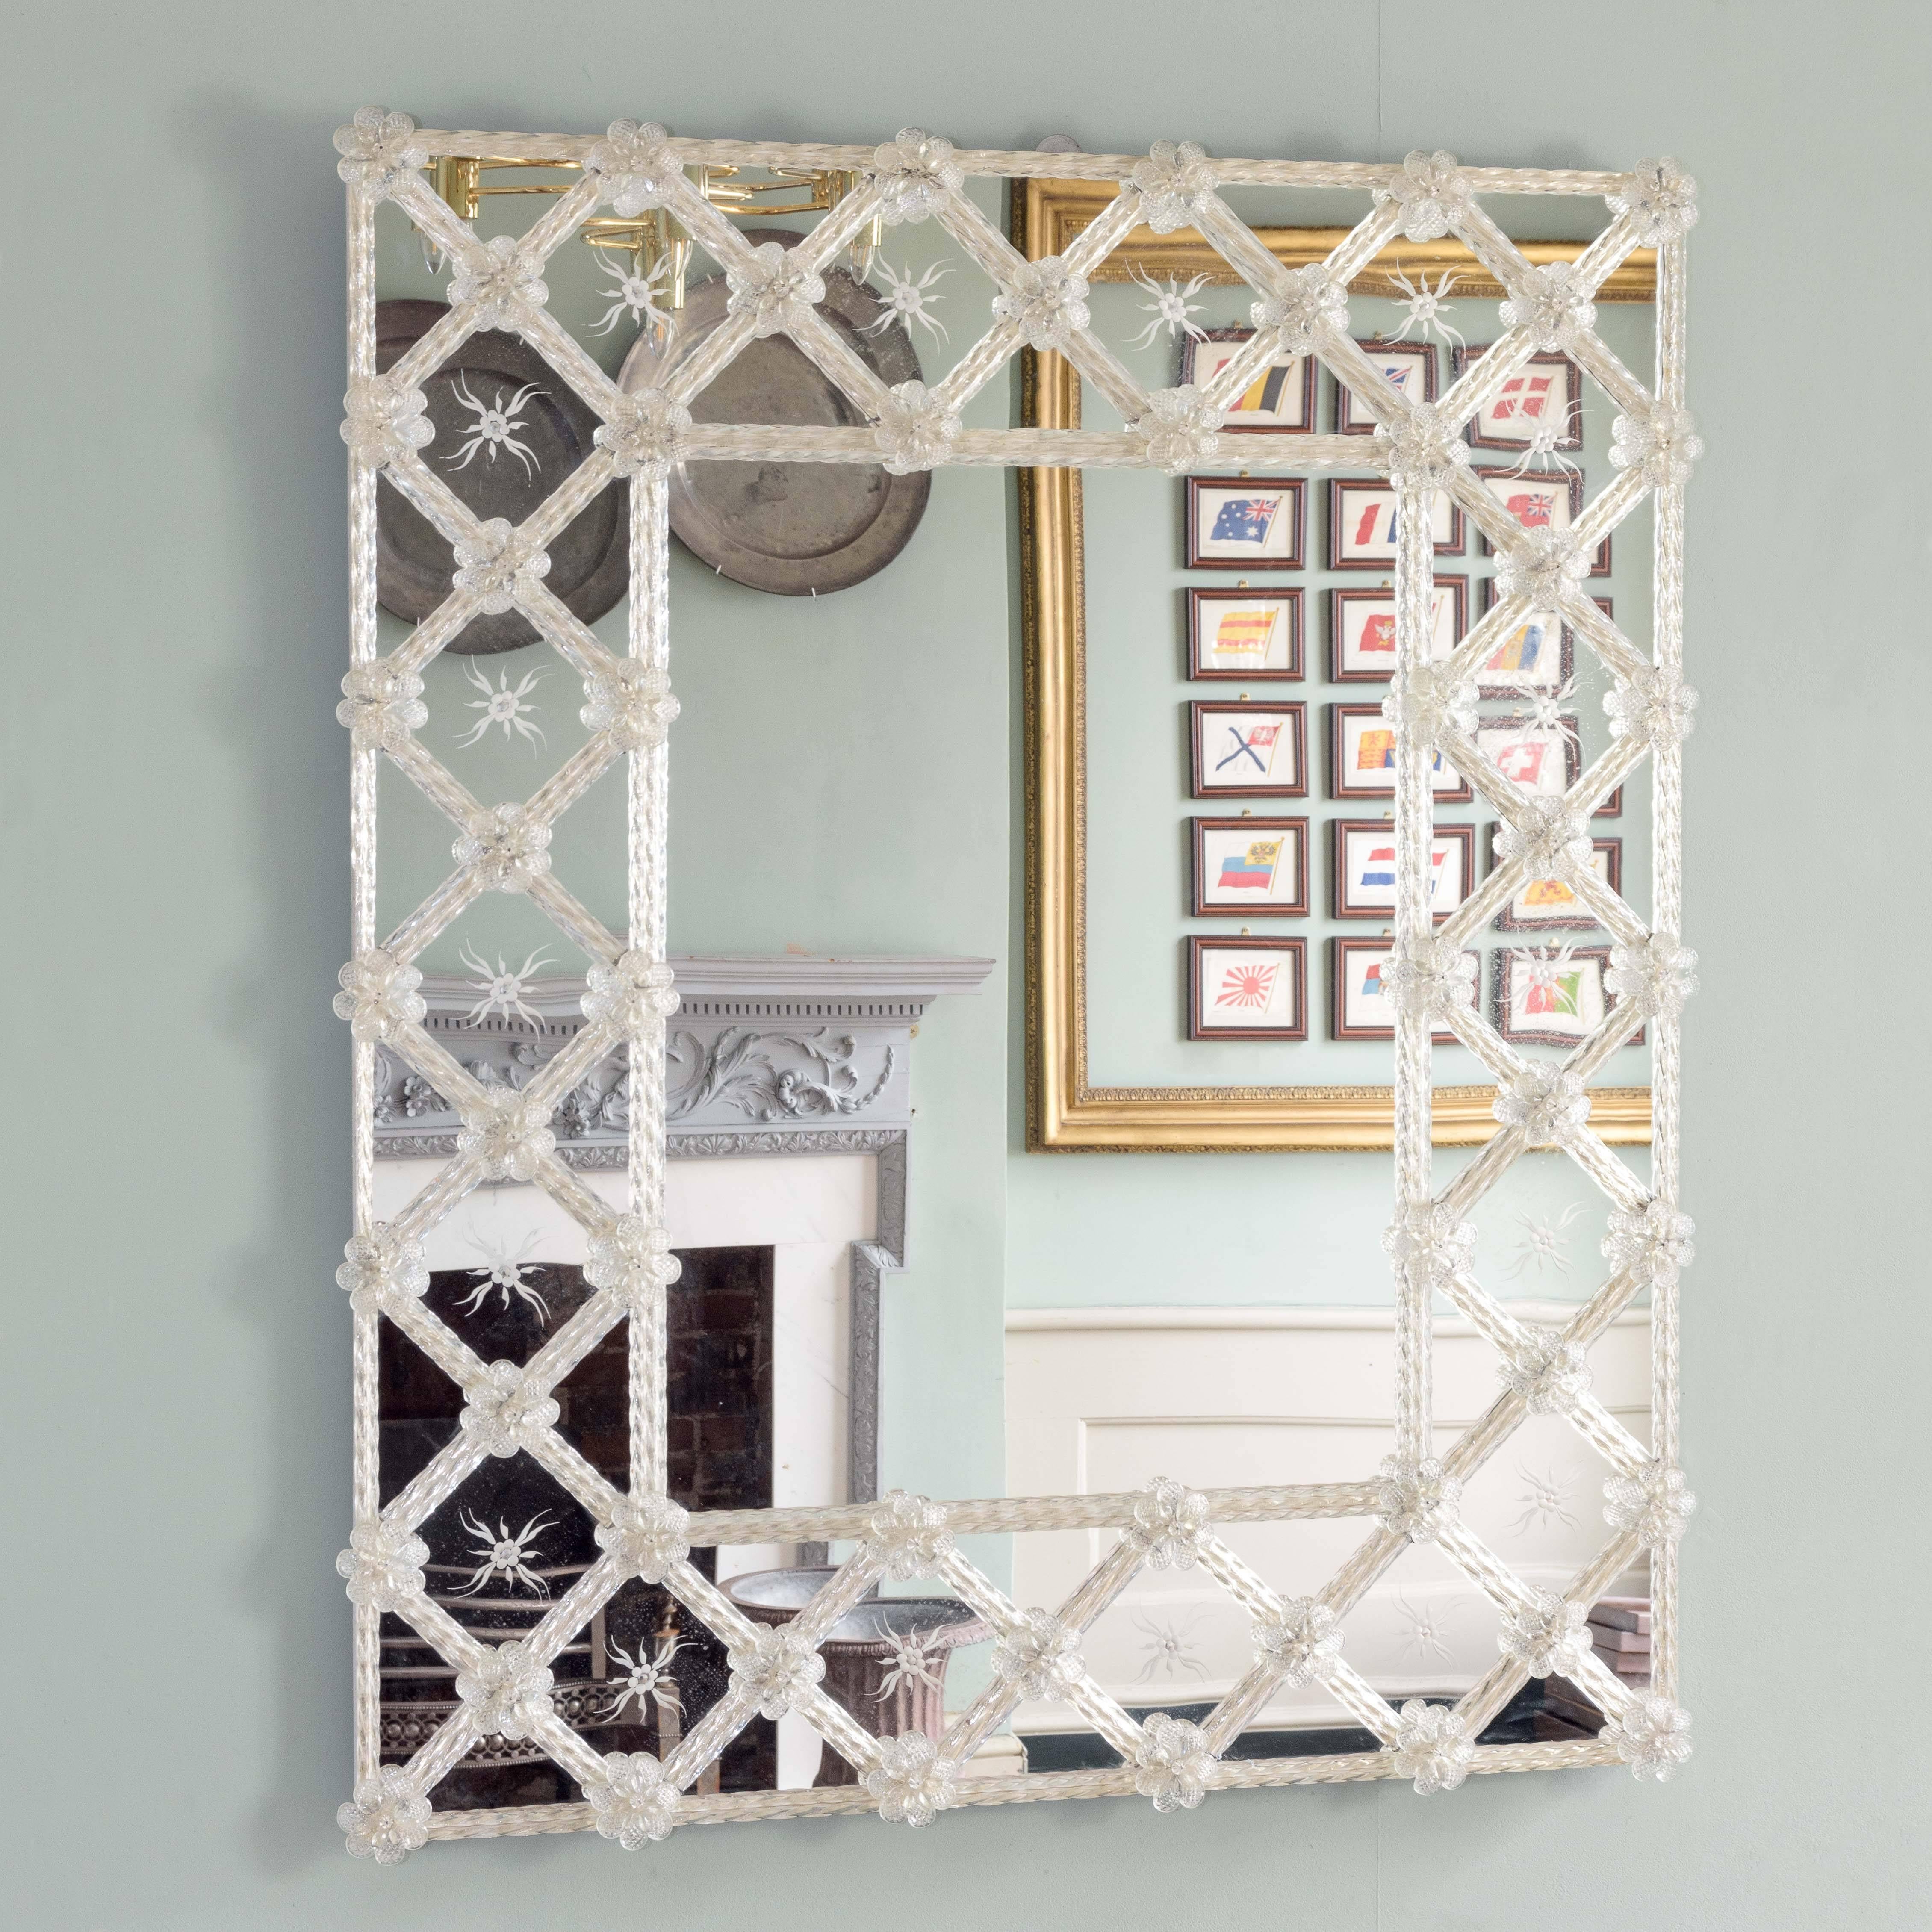 1970s Italian wall mirror, with moulded glass crosshatched frame and floral bosses to the intersections.